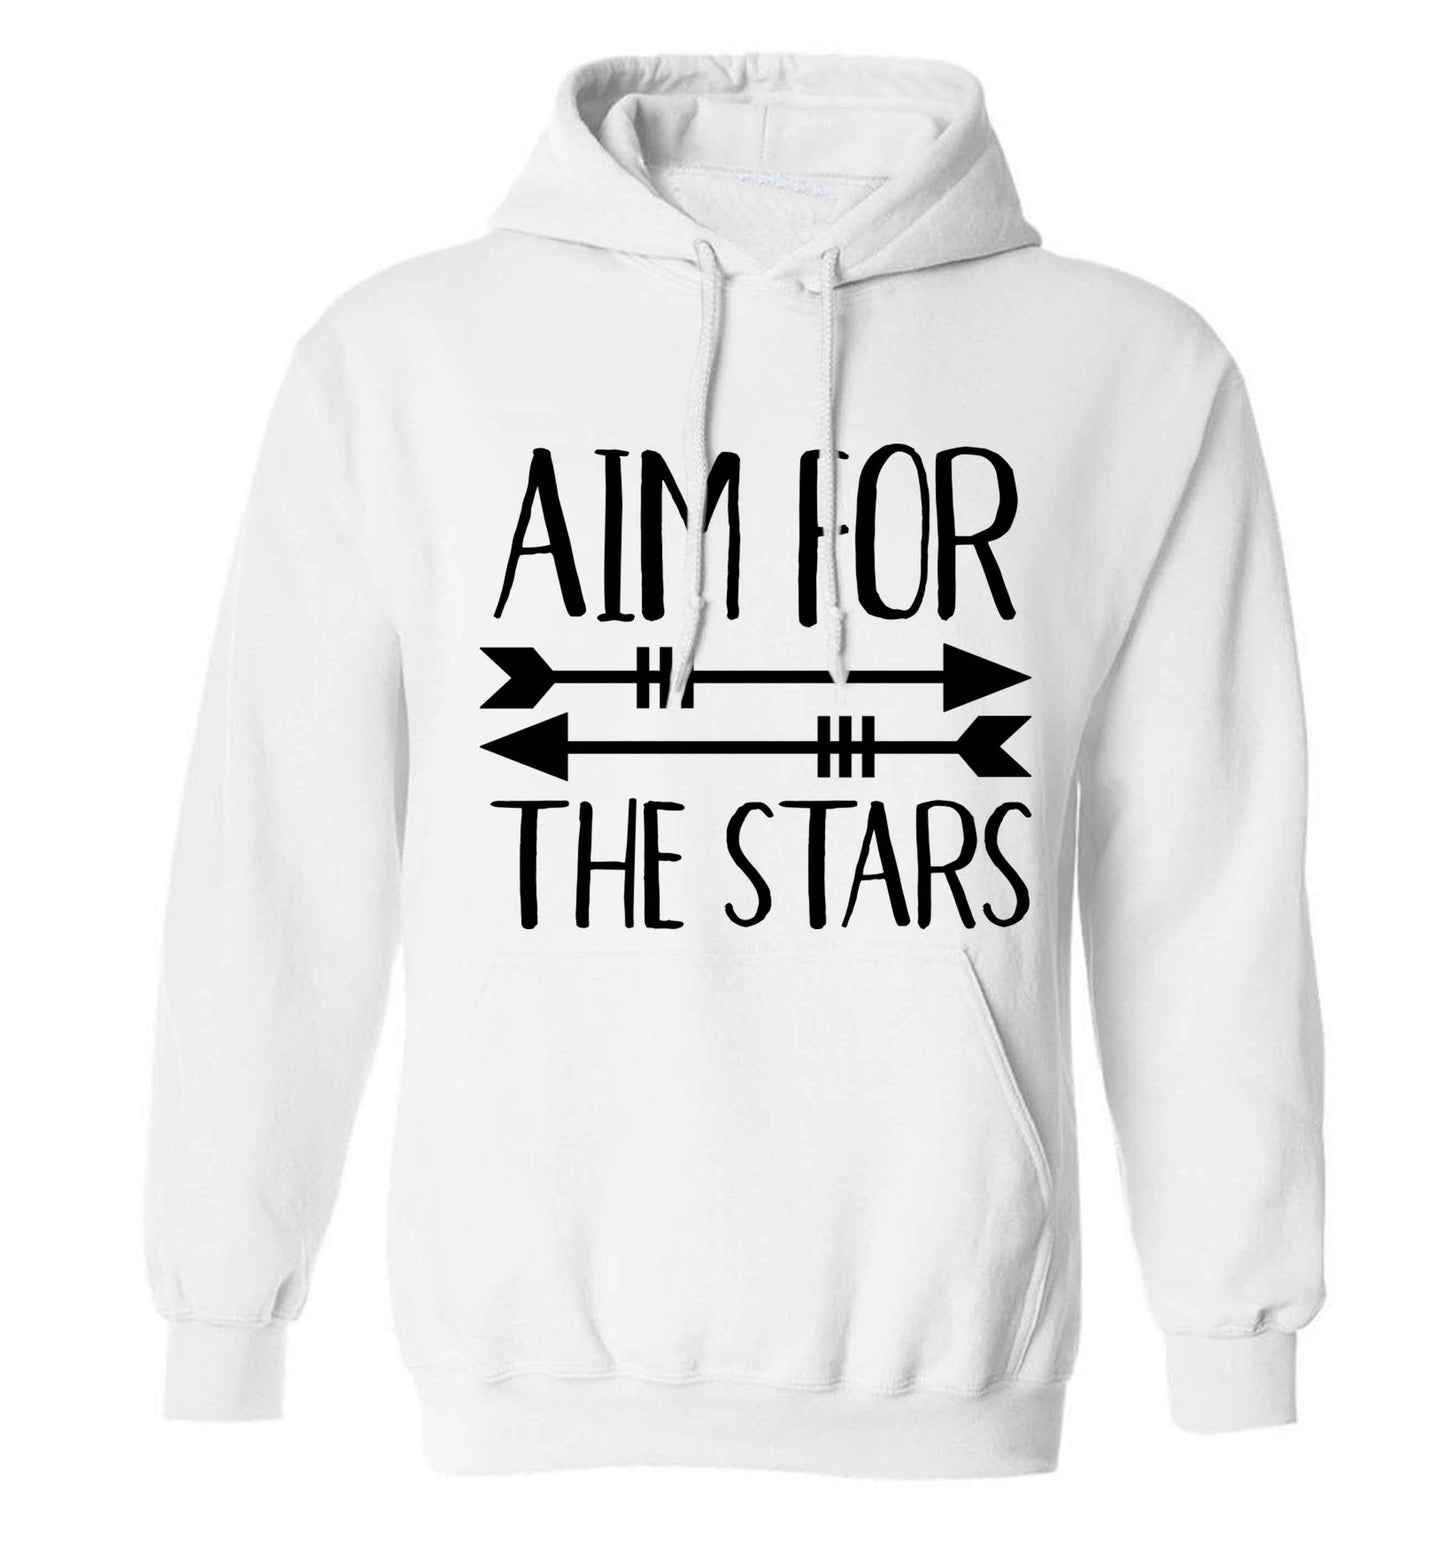 Aim for the stars adults unisex white hoodie 2XL